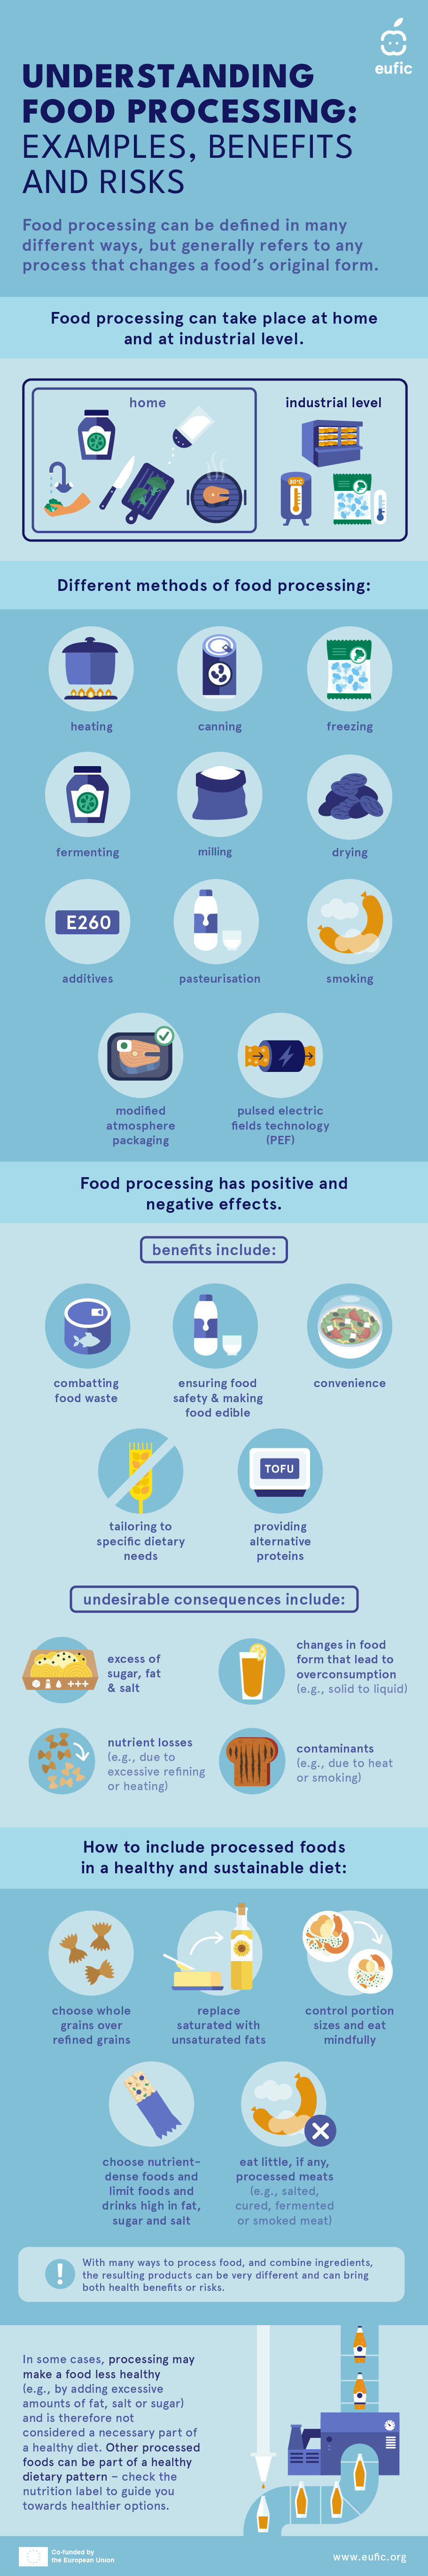 food processing: examples, benefits and risks